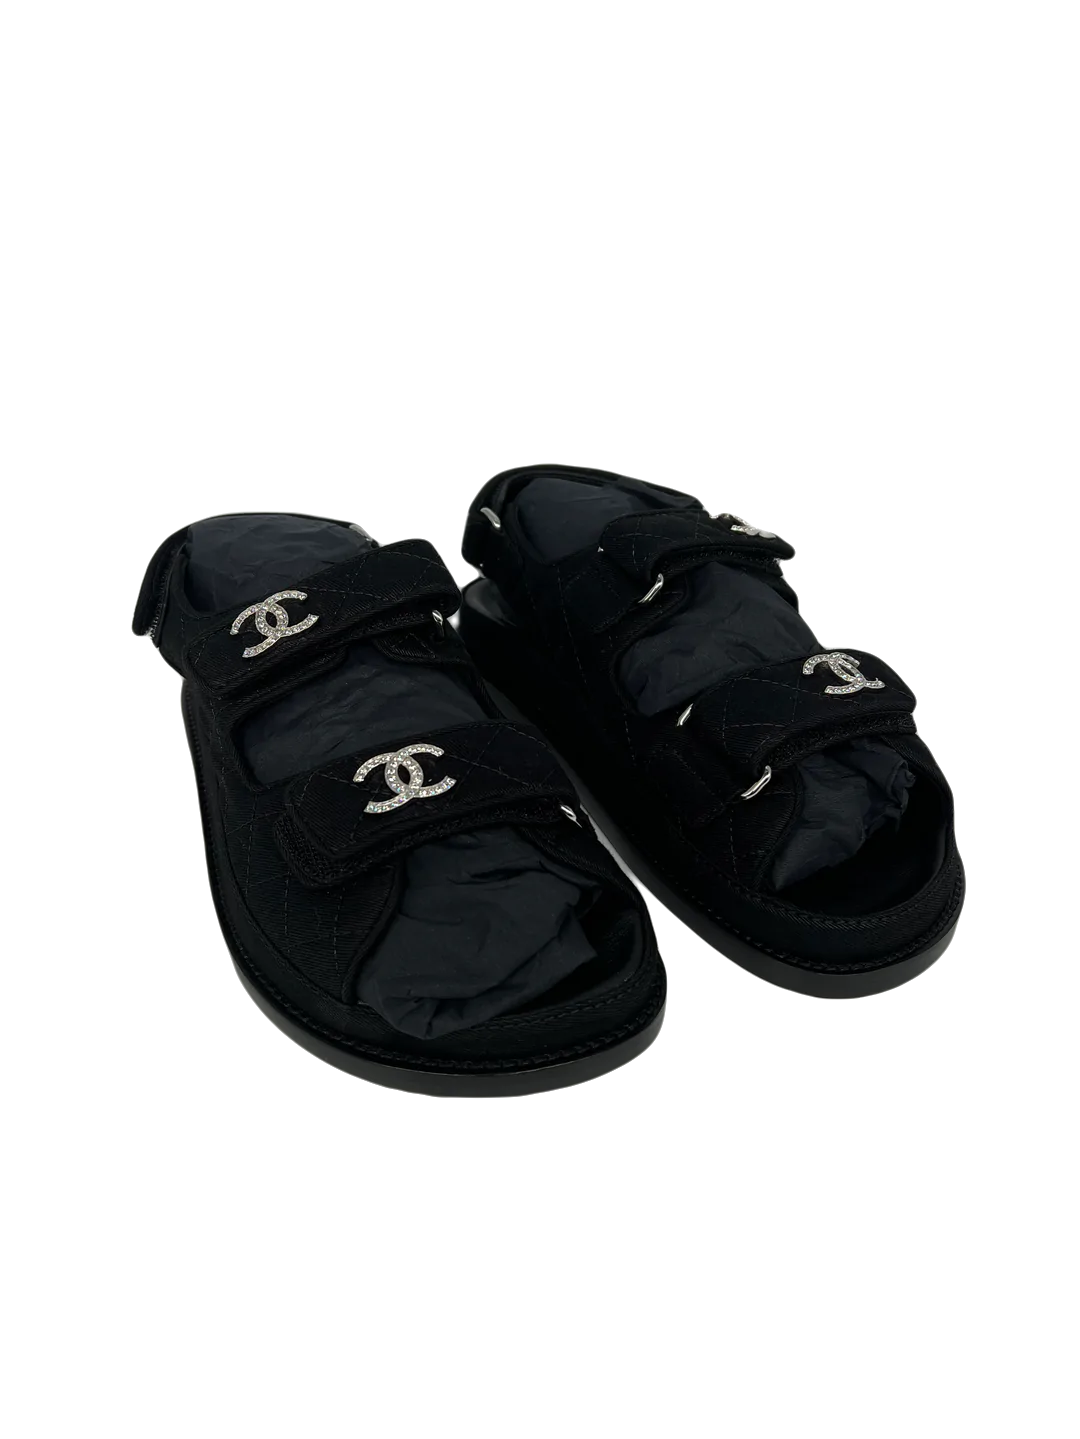 Chanel Dad Sandals - Size 35 - SOLD